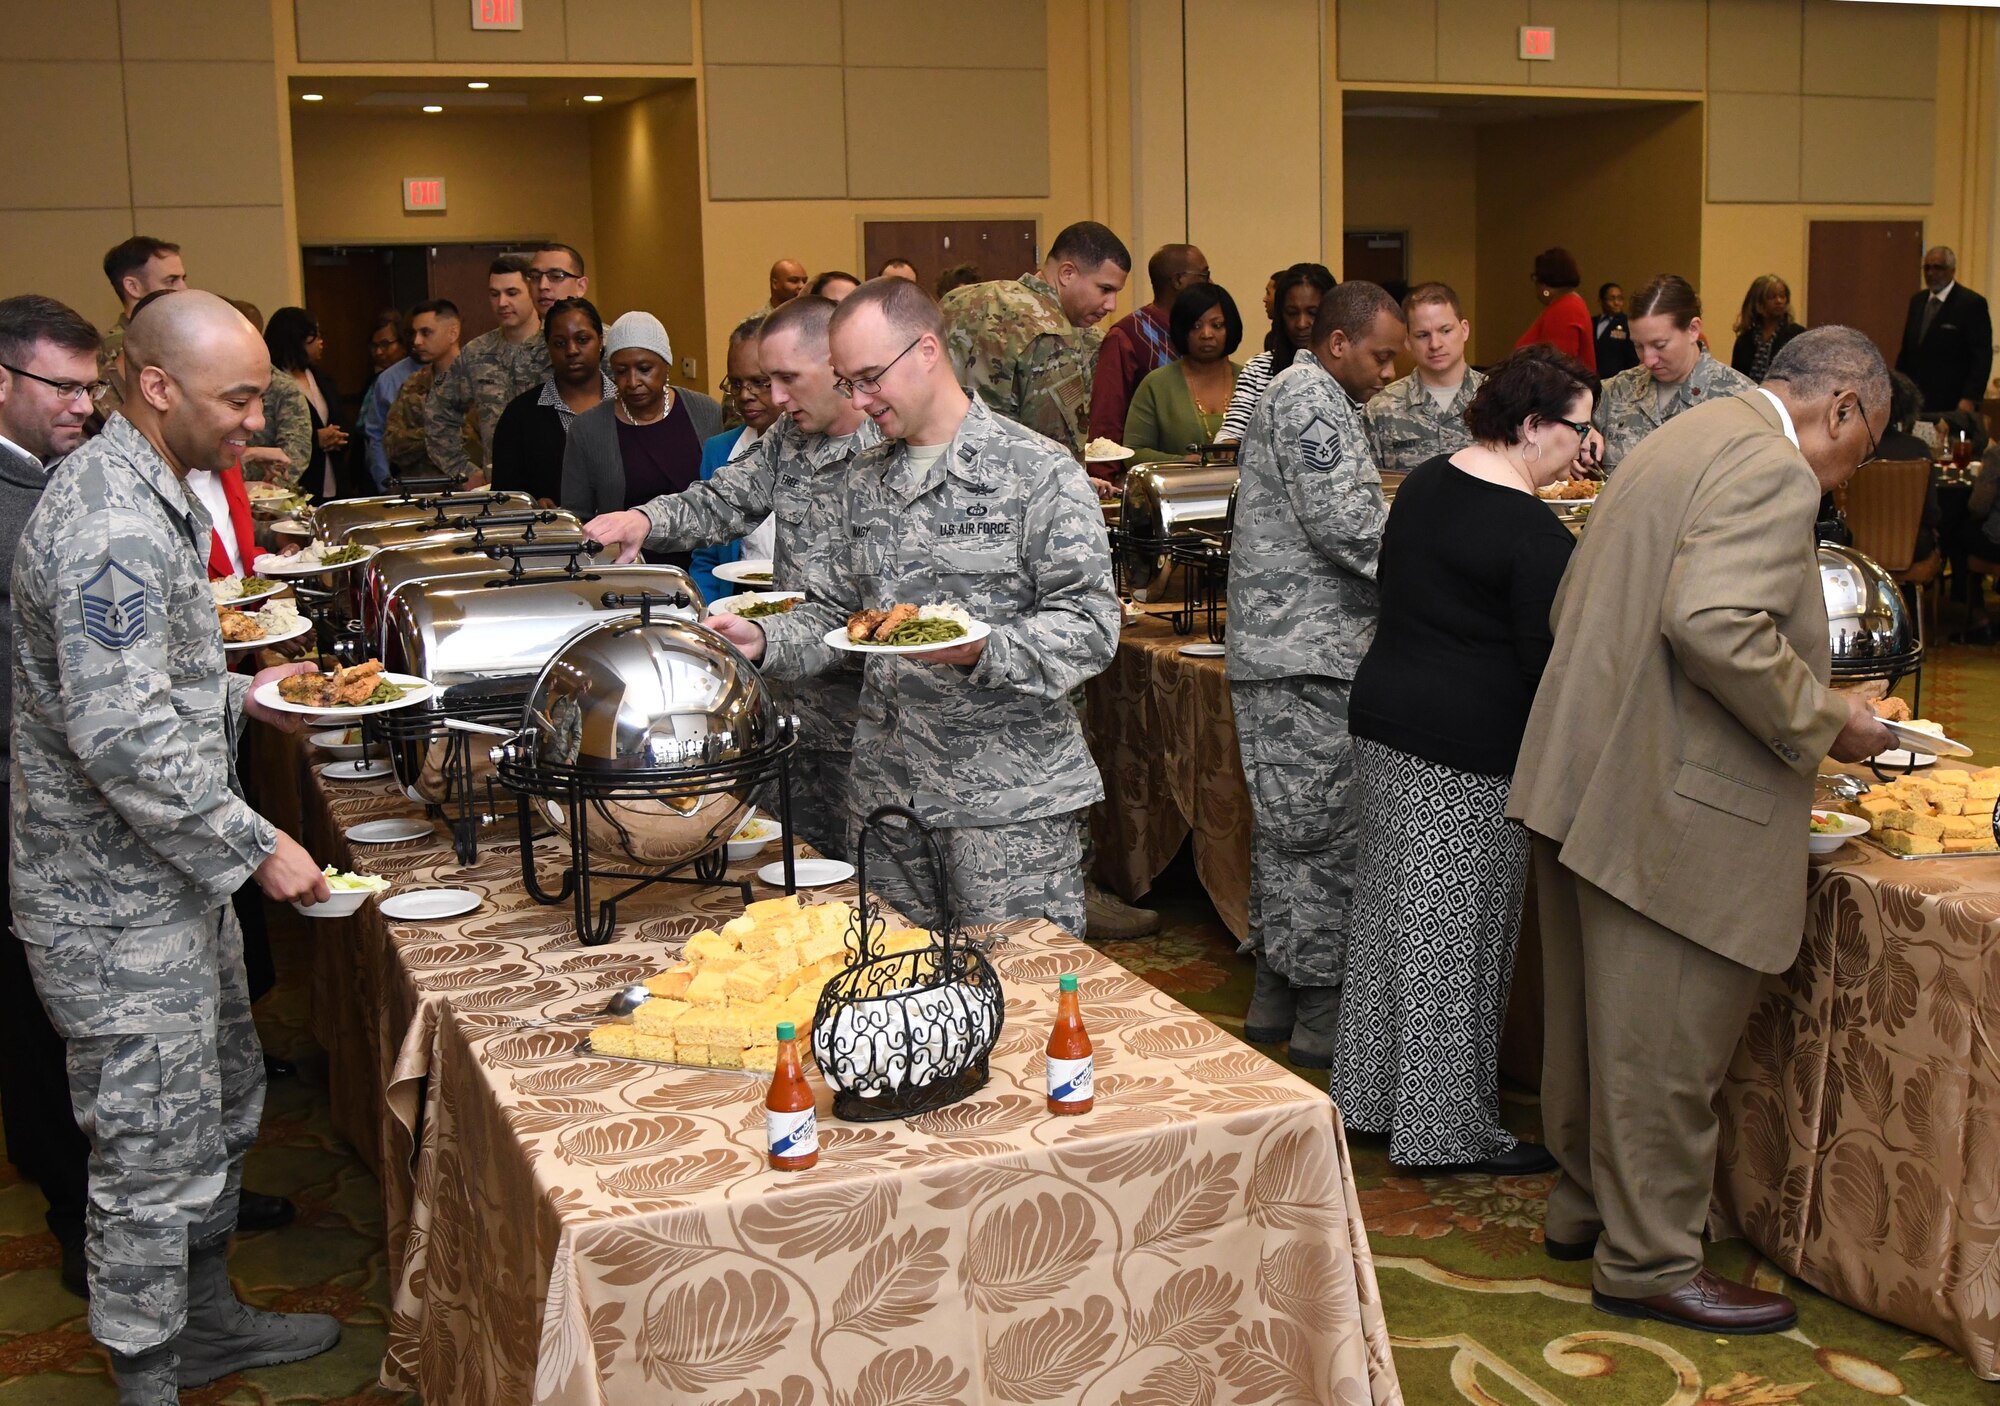 eesler personnel attend the annual Dr. Martin Luther King Jr. Memorial Luncheon inside the Bay Breeze Event Center at Keesler Air Force Base, Mississippi, Jan. 15, 2019. The 81st Training Wing and Wing Staff Agencies hosted the event honoring King's legacy and his efforts to inspire civil rights activism within the African-American community. He is widely regarded as America's pre-eminent advocate of nonviolence and one of the greatest nonviolent leaders in world history. (U.S. Air Force photo by Kemberly Groue)